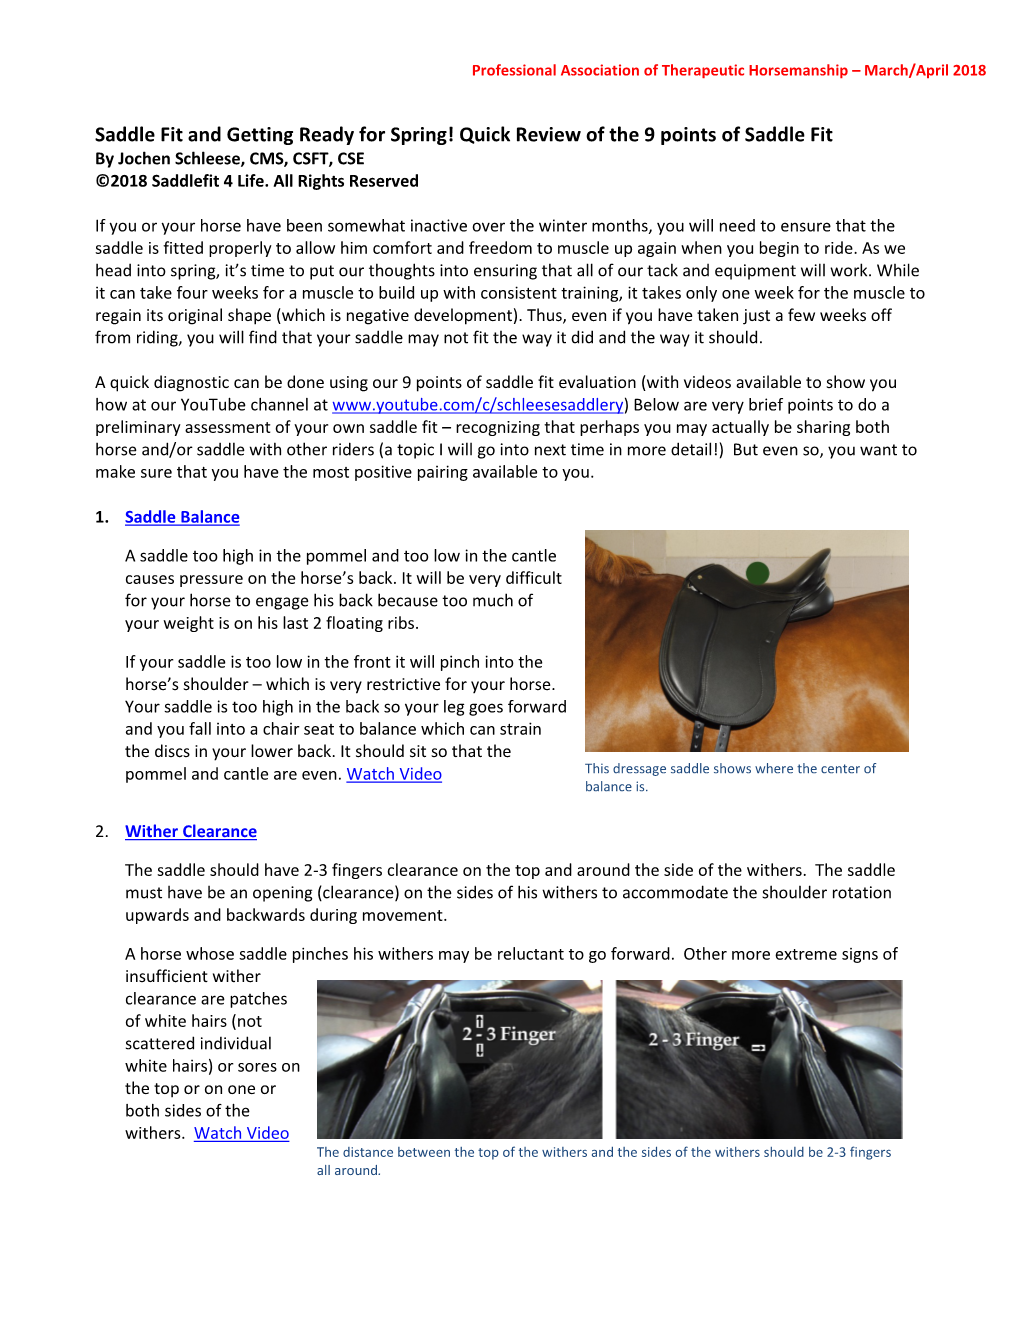 Quick Review of the 9 Points of Saddle Fit by Jochen Schleese, CMS, CSFT, CSE ©2018 Saddlefit 4 Life